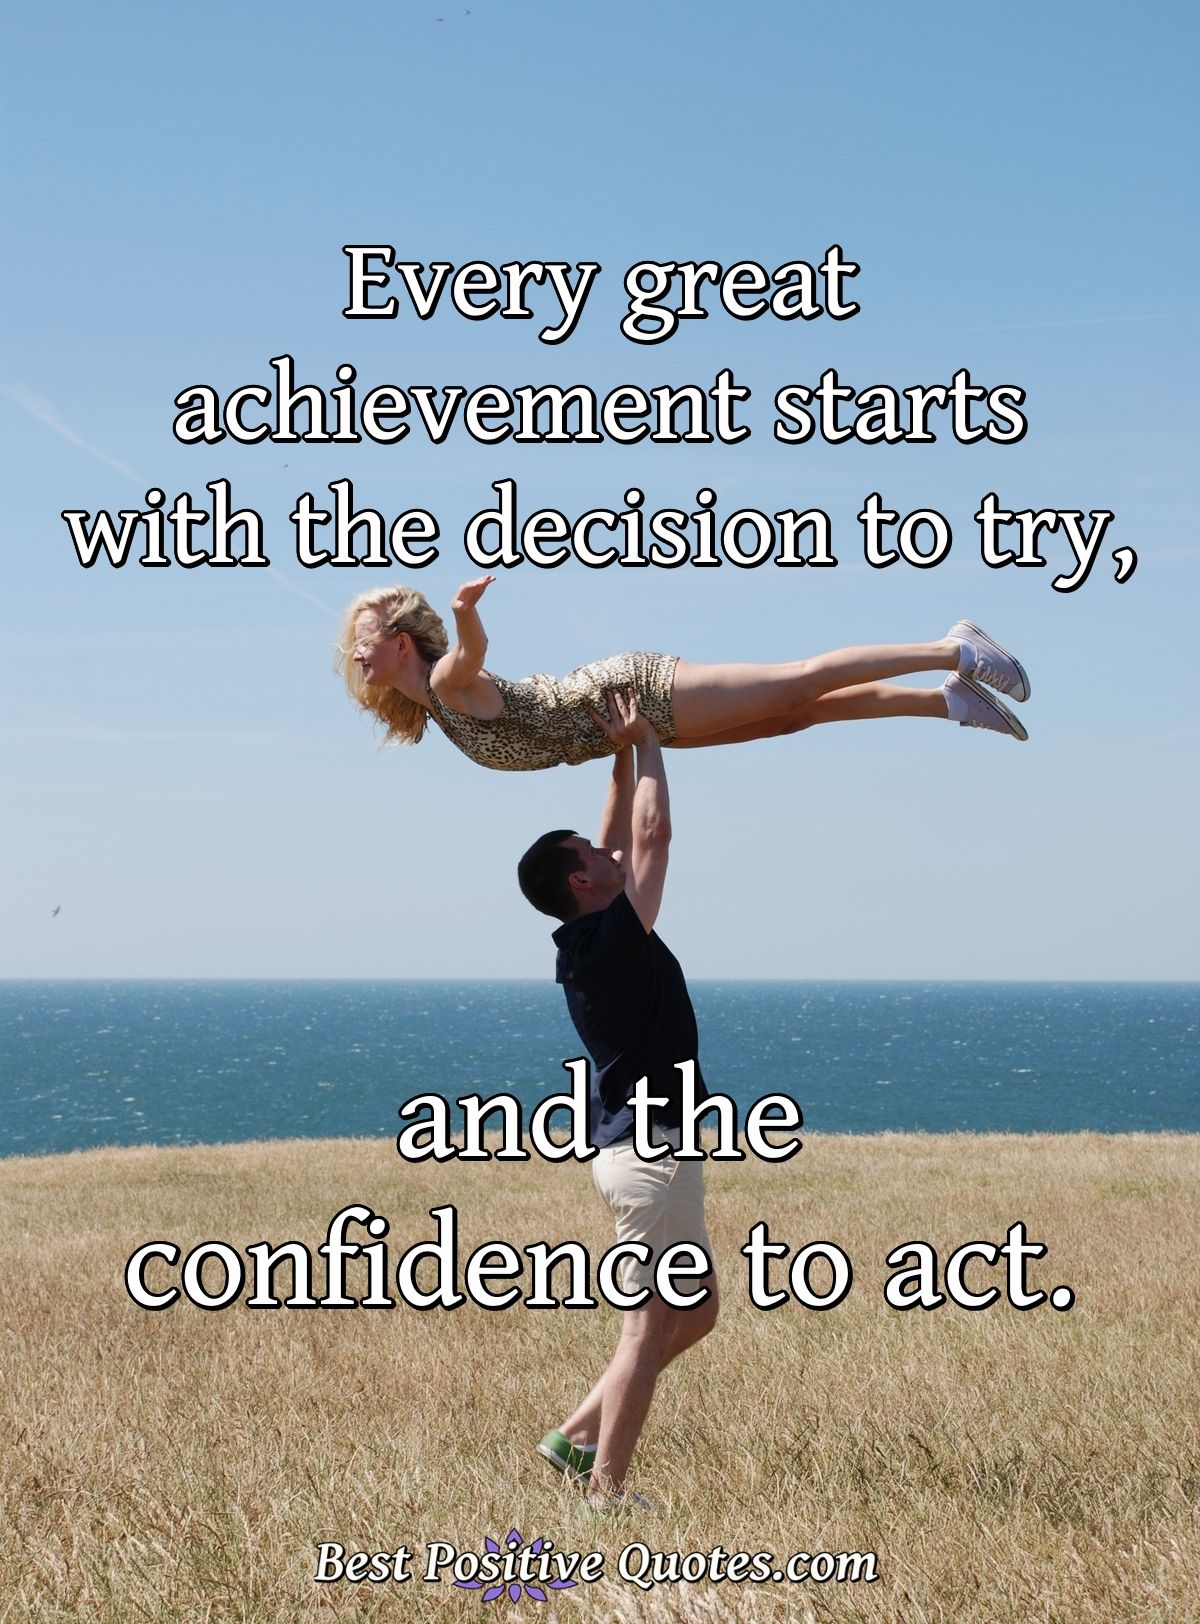 Every great achievement starts with the decision to try, and the confidence to act. - Anonymous